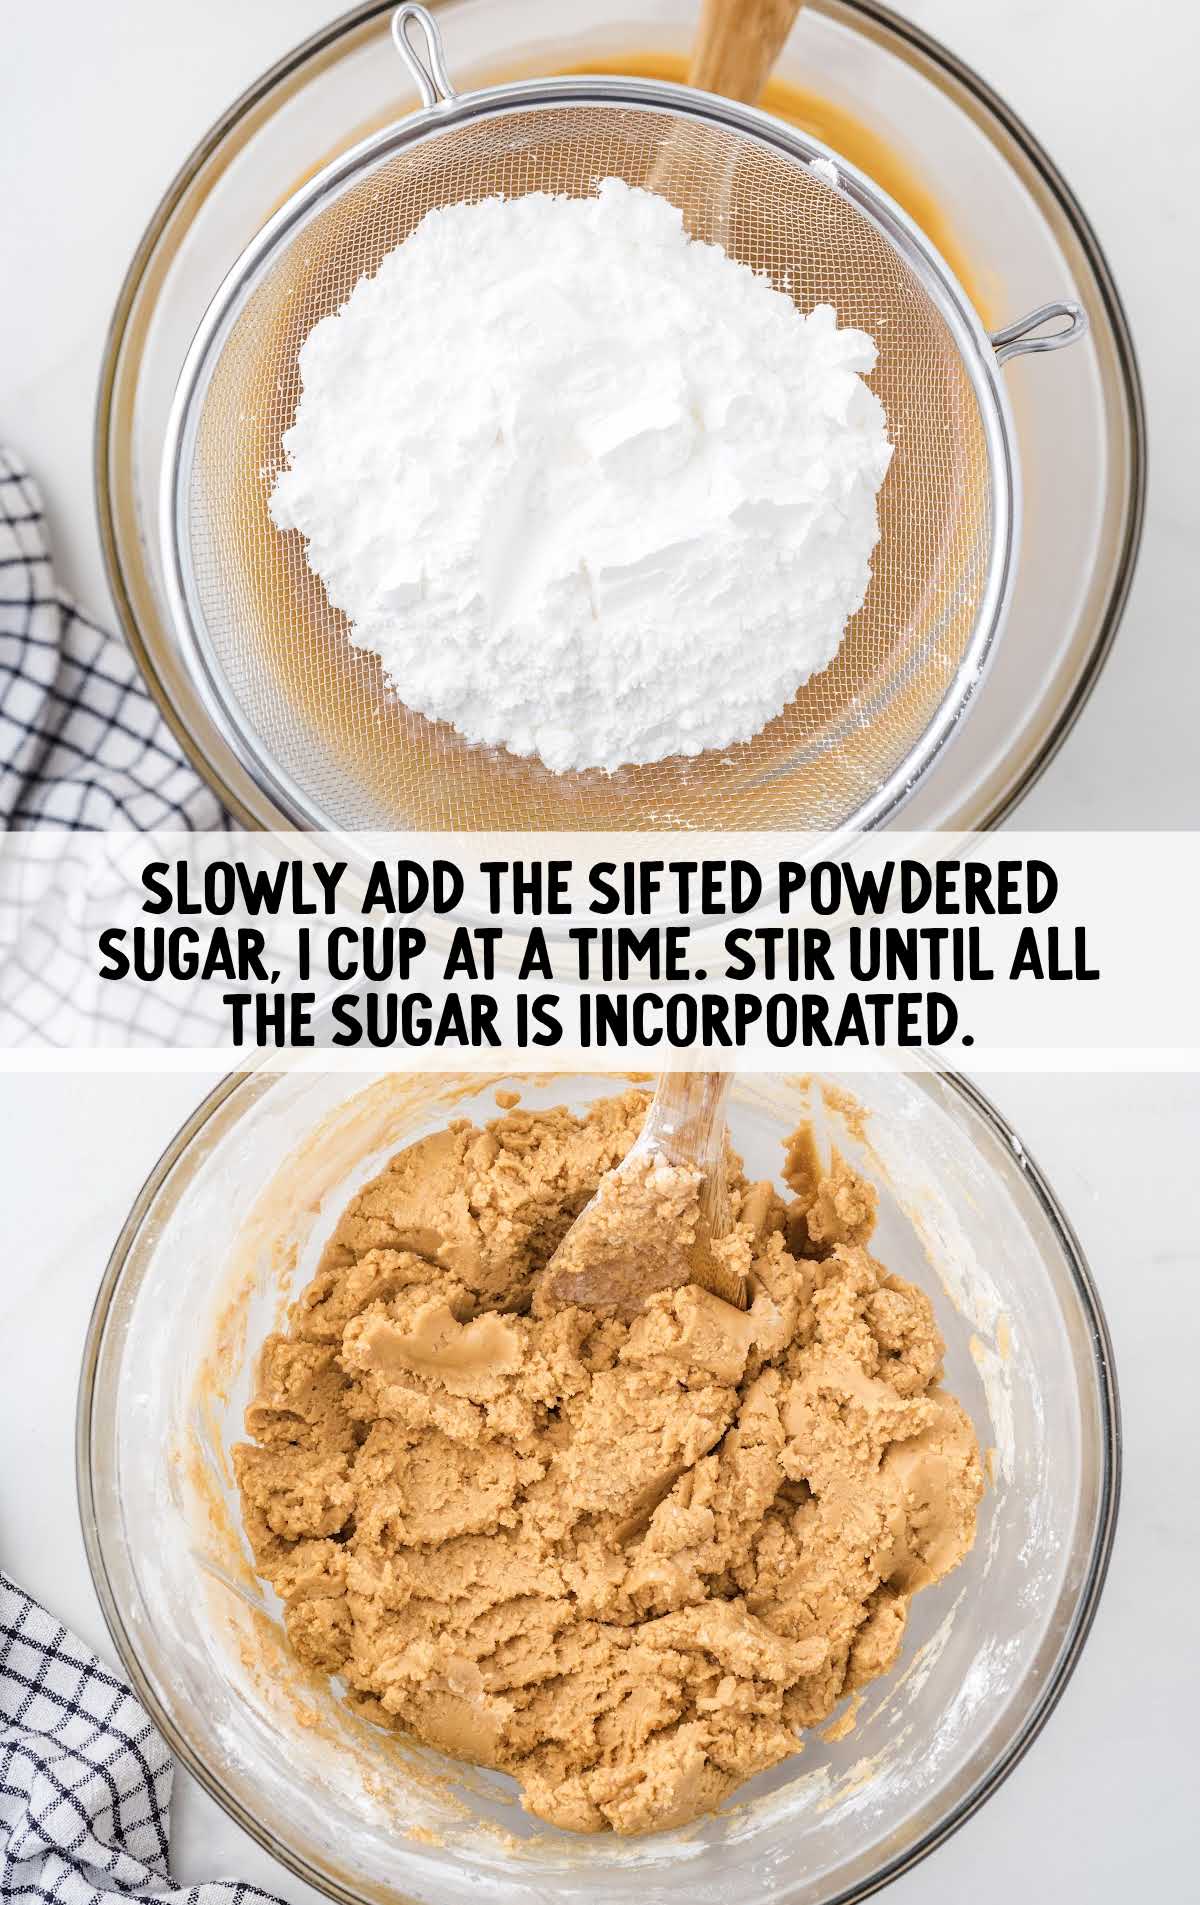 powdered sugar added to the peanut butter mixture in a bowl